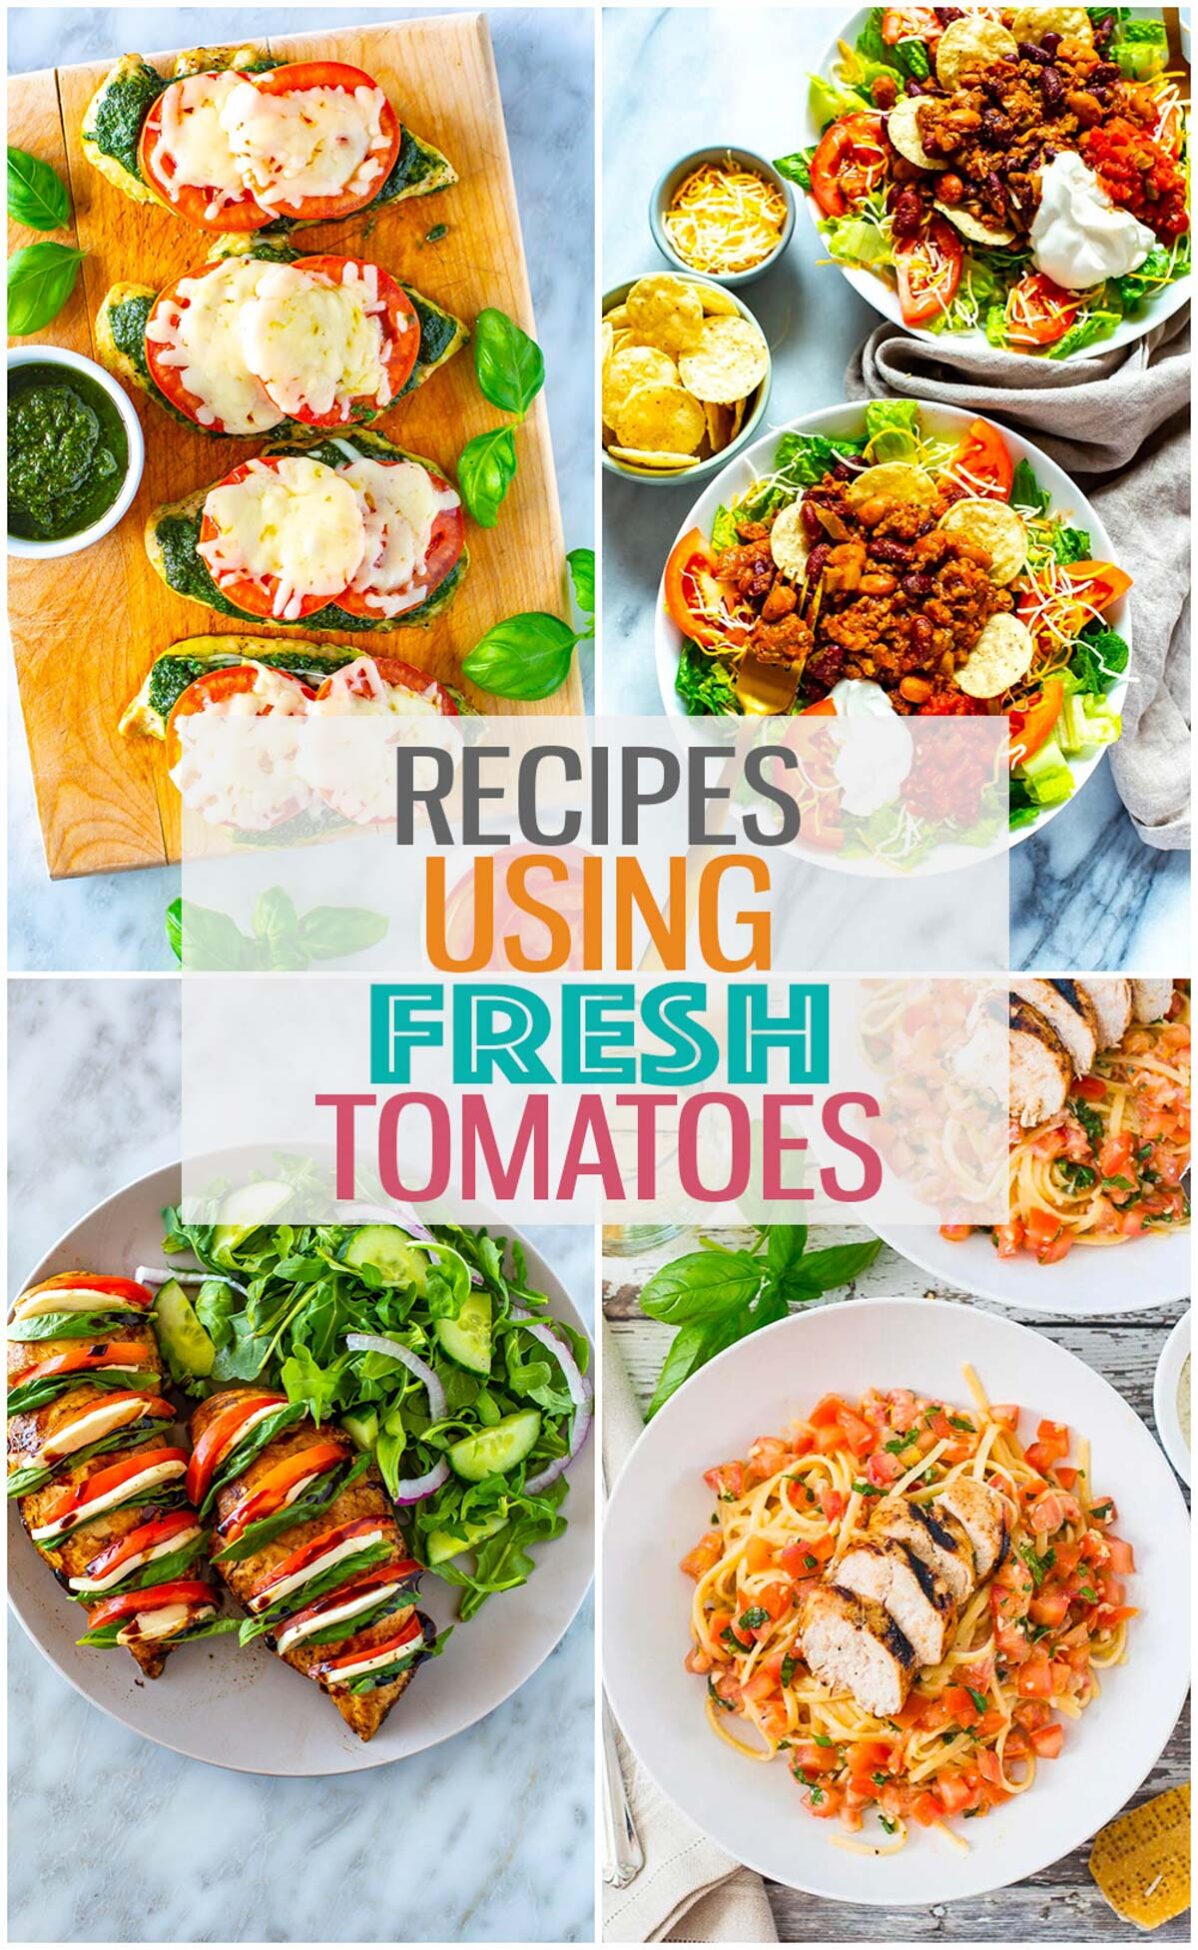 A collage of four different fresh tomato recipes with the text "Recipes Using Fresh Tomatoes" layered over top.